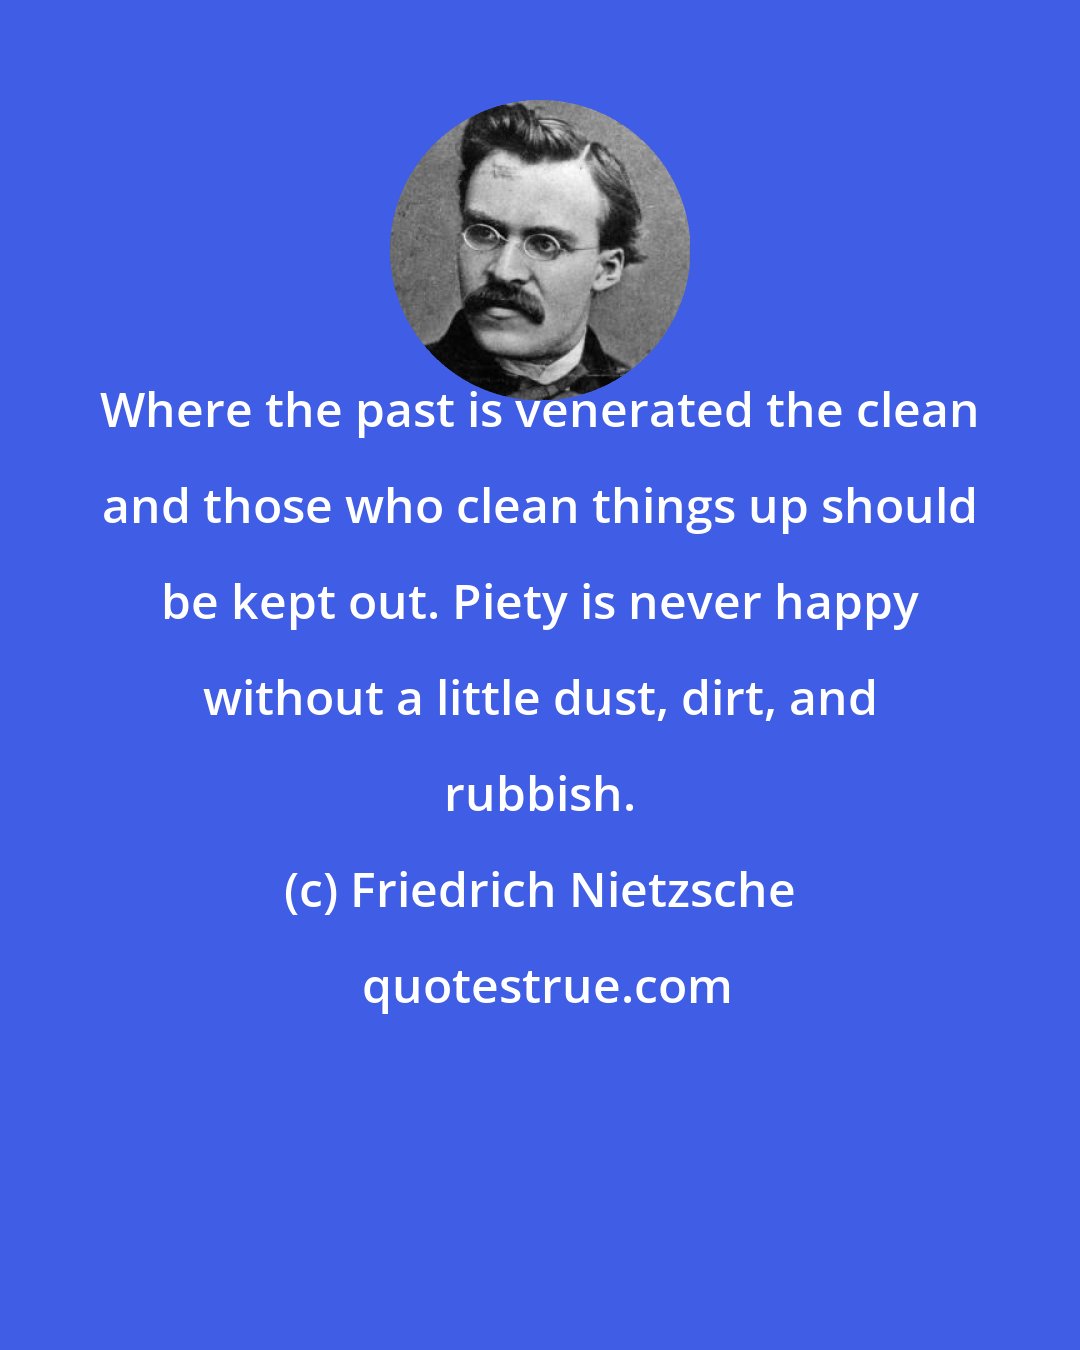 Friedrich Nietzsche: Where the past is venerated the clean and those who clean things up should be kept out. Piety is never happy without a little dust, dirt, and rubbish.